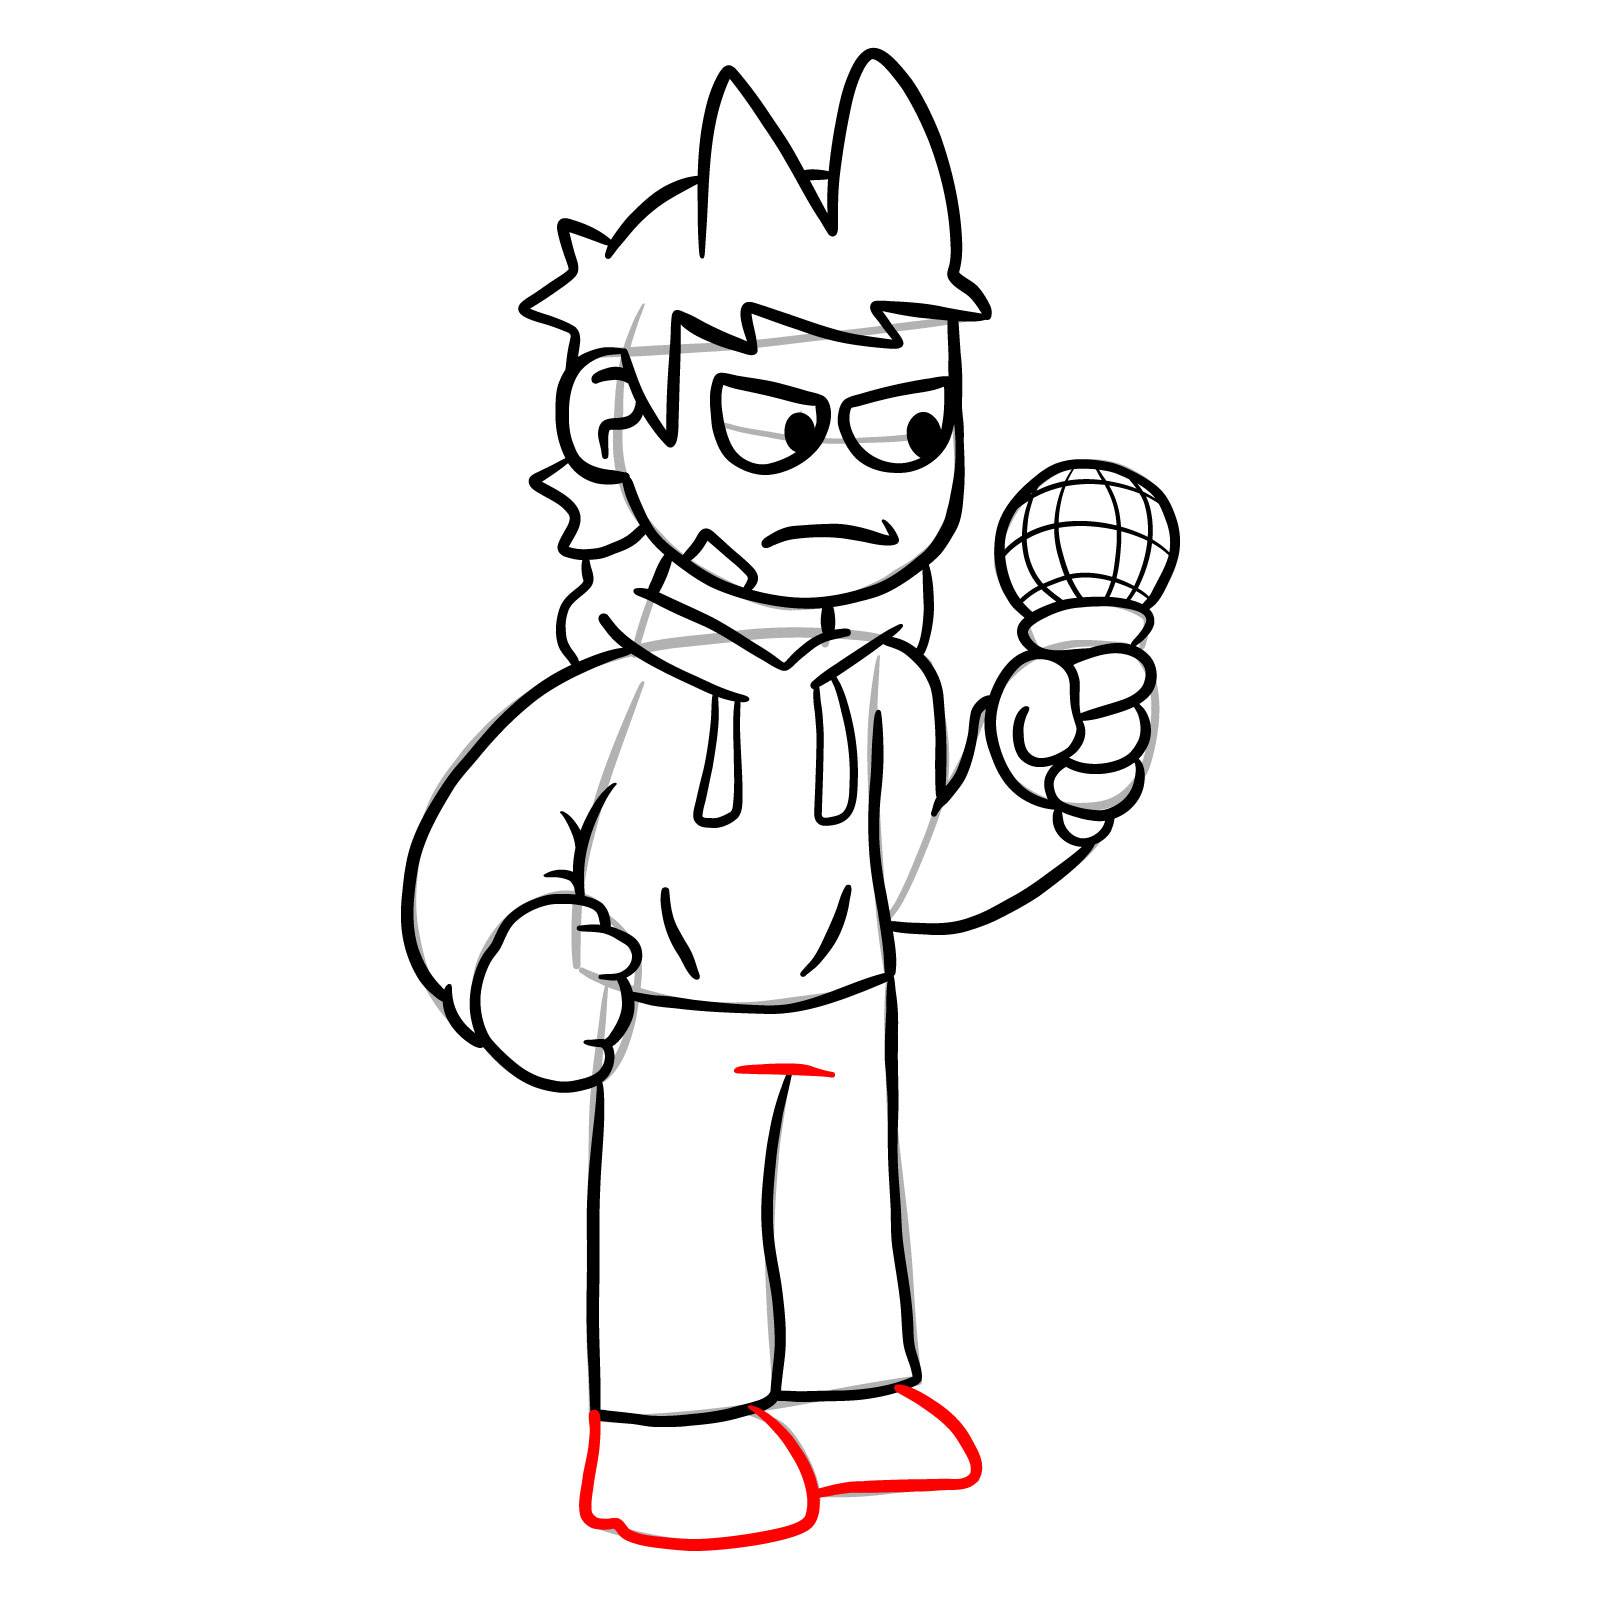 How to draw Tord from FNF - step 23